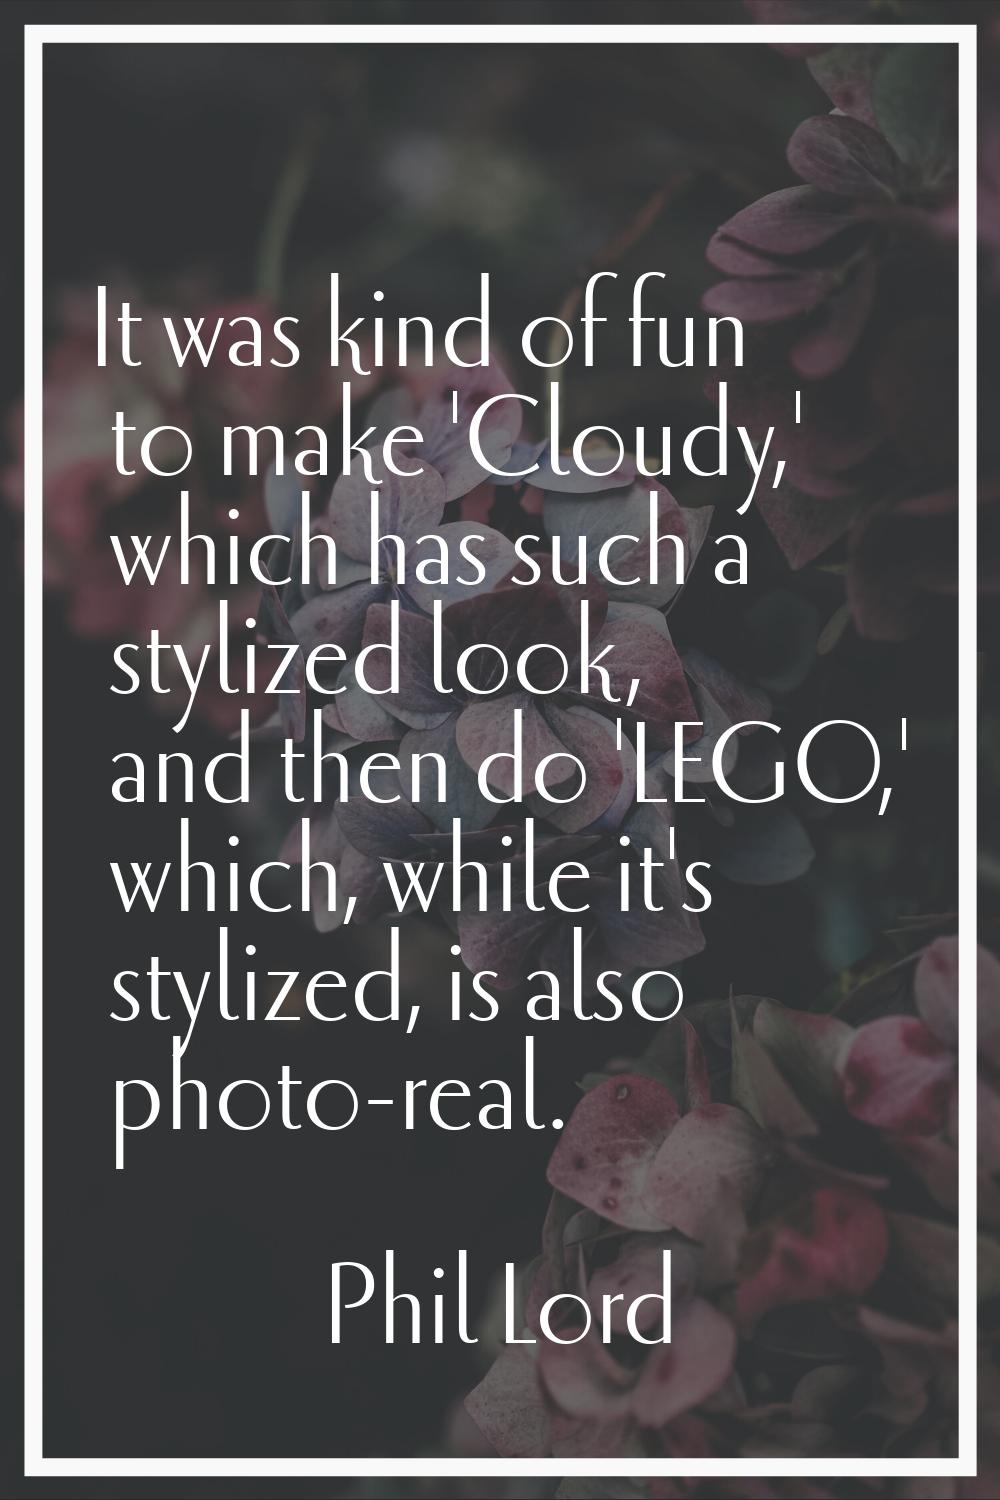 It was kind of fun to make 'Cloudy,' which has such a stylized look, and then do 'LEGO,' which, whi